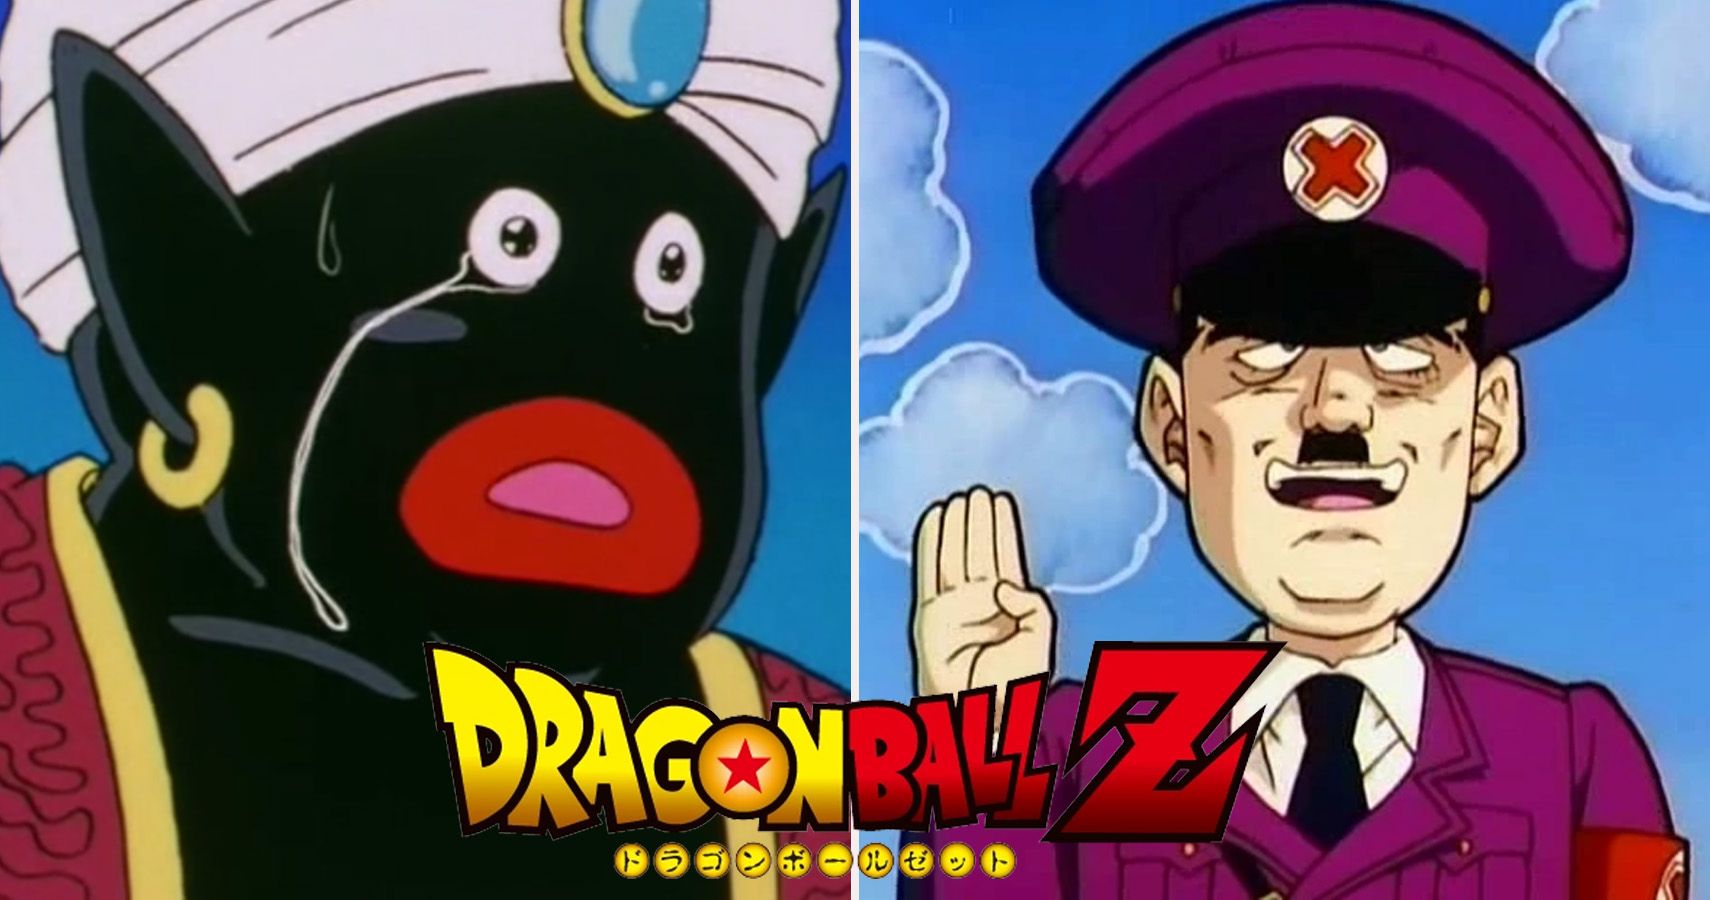 Only In Japan: Ways Dragon Ball Z Was Censored In America